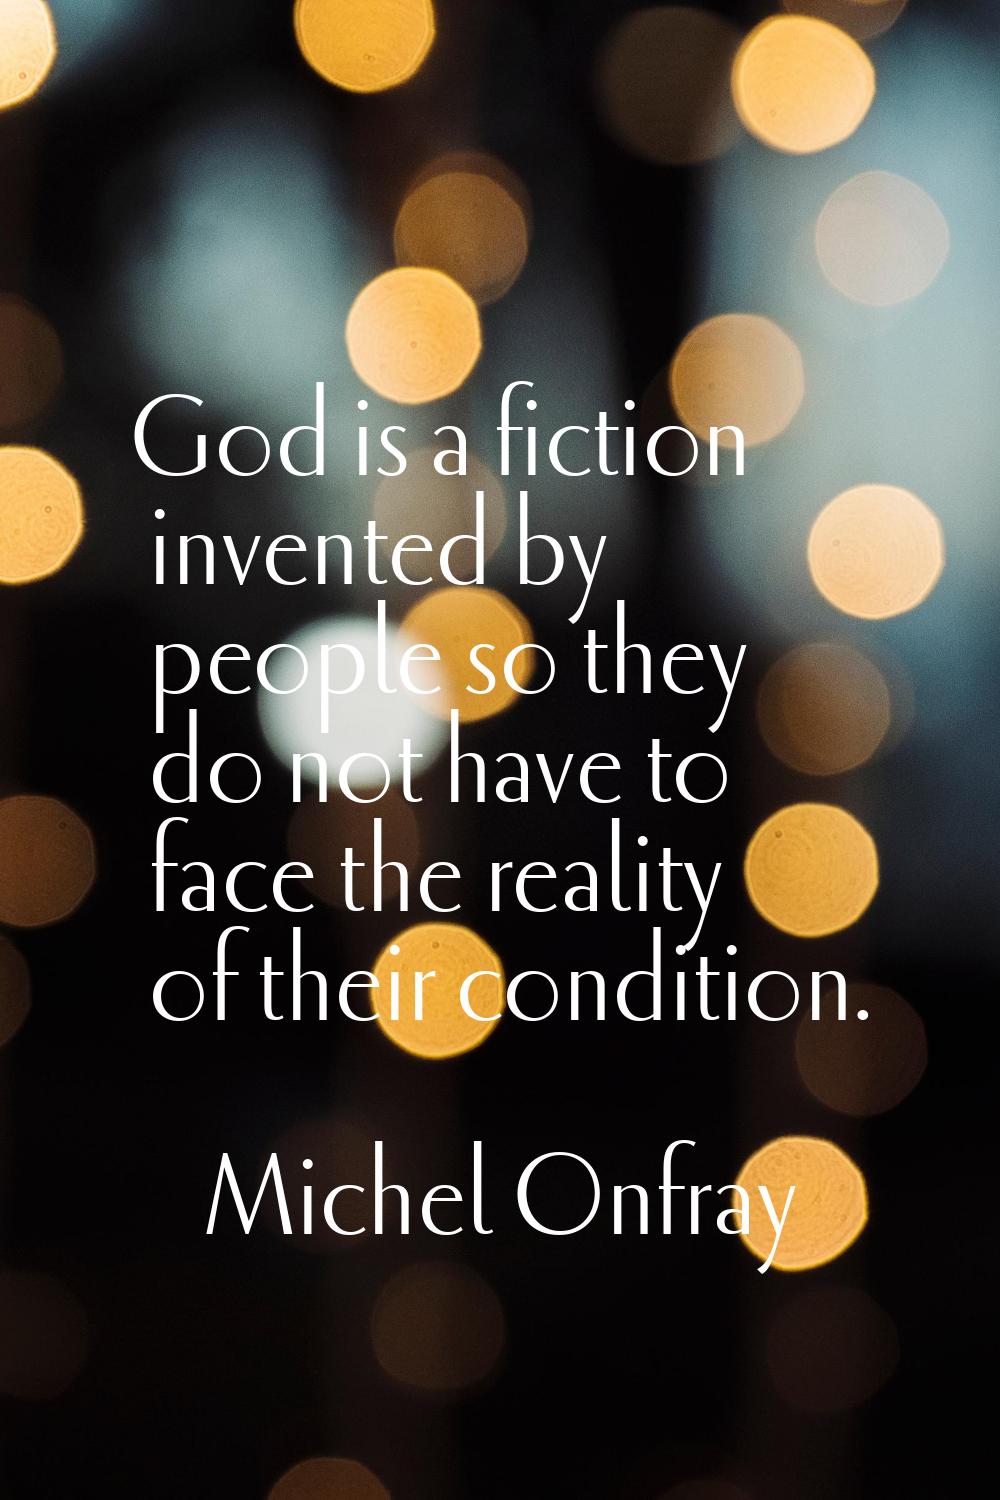 God is a fiction invented by people so they do not have to face the reality of their condition.